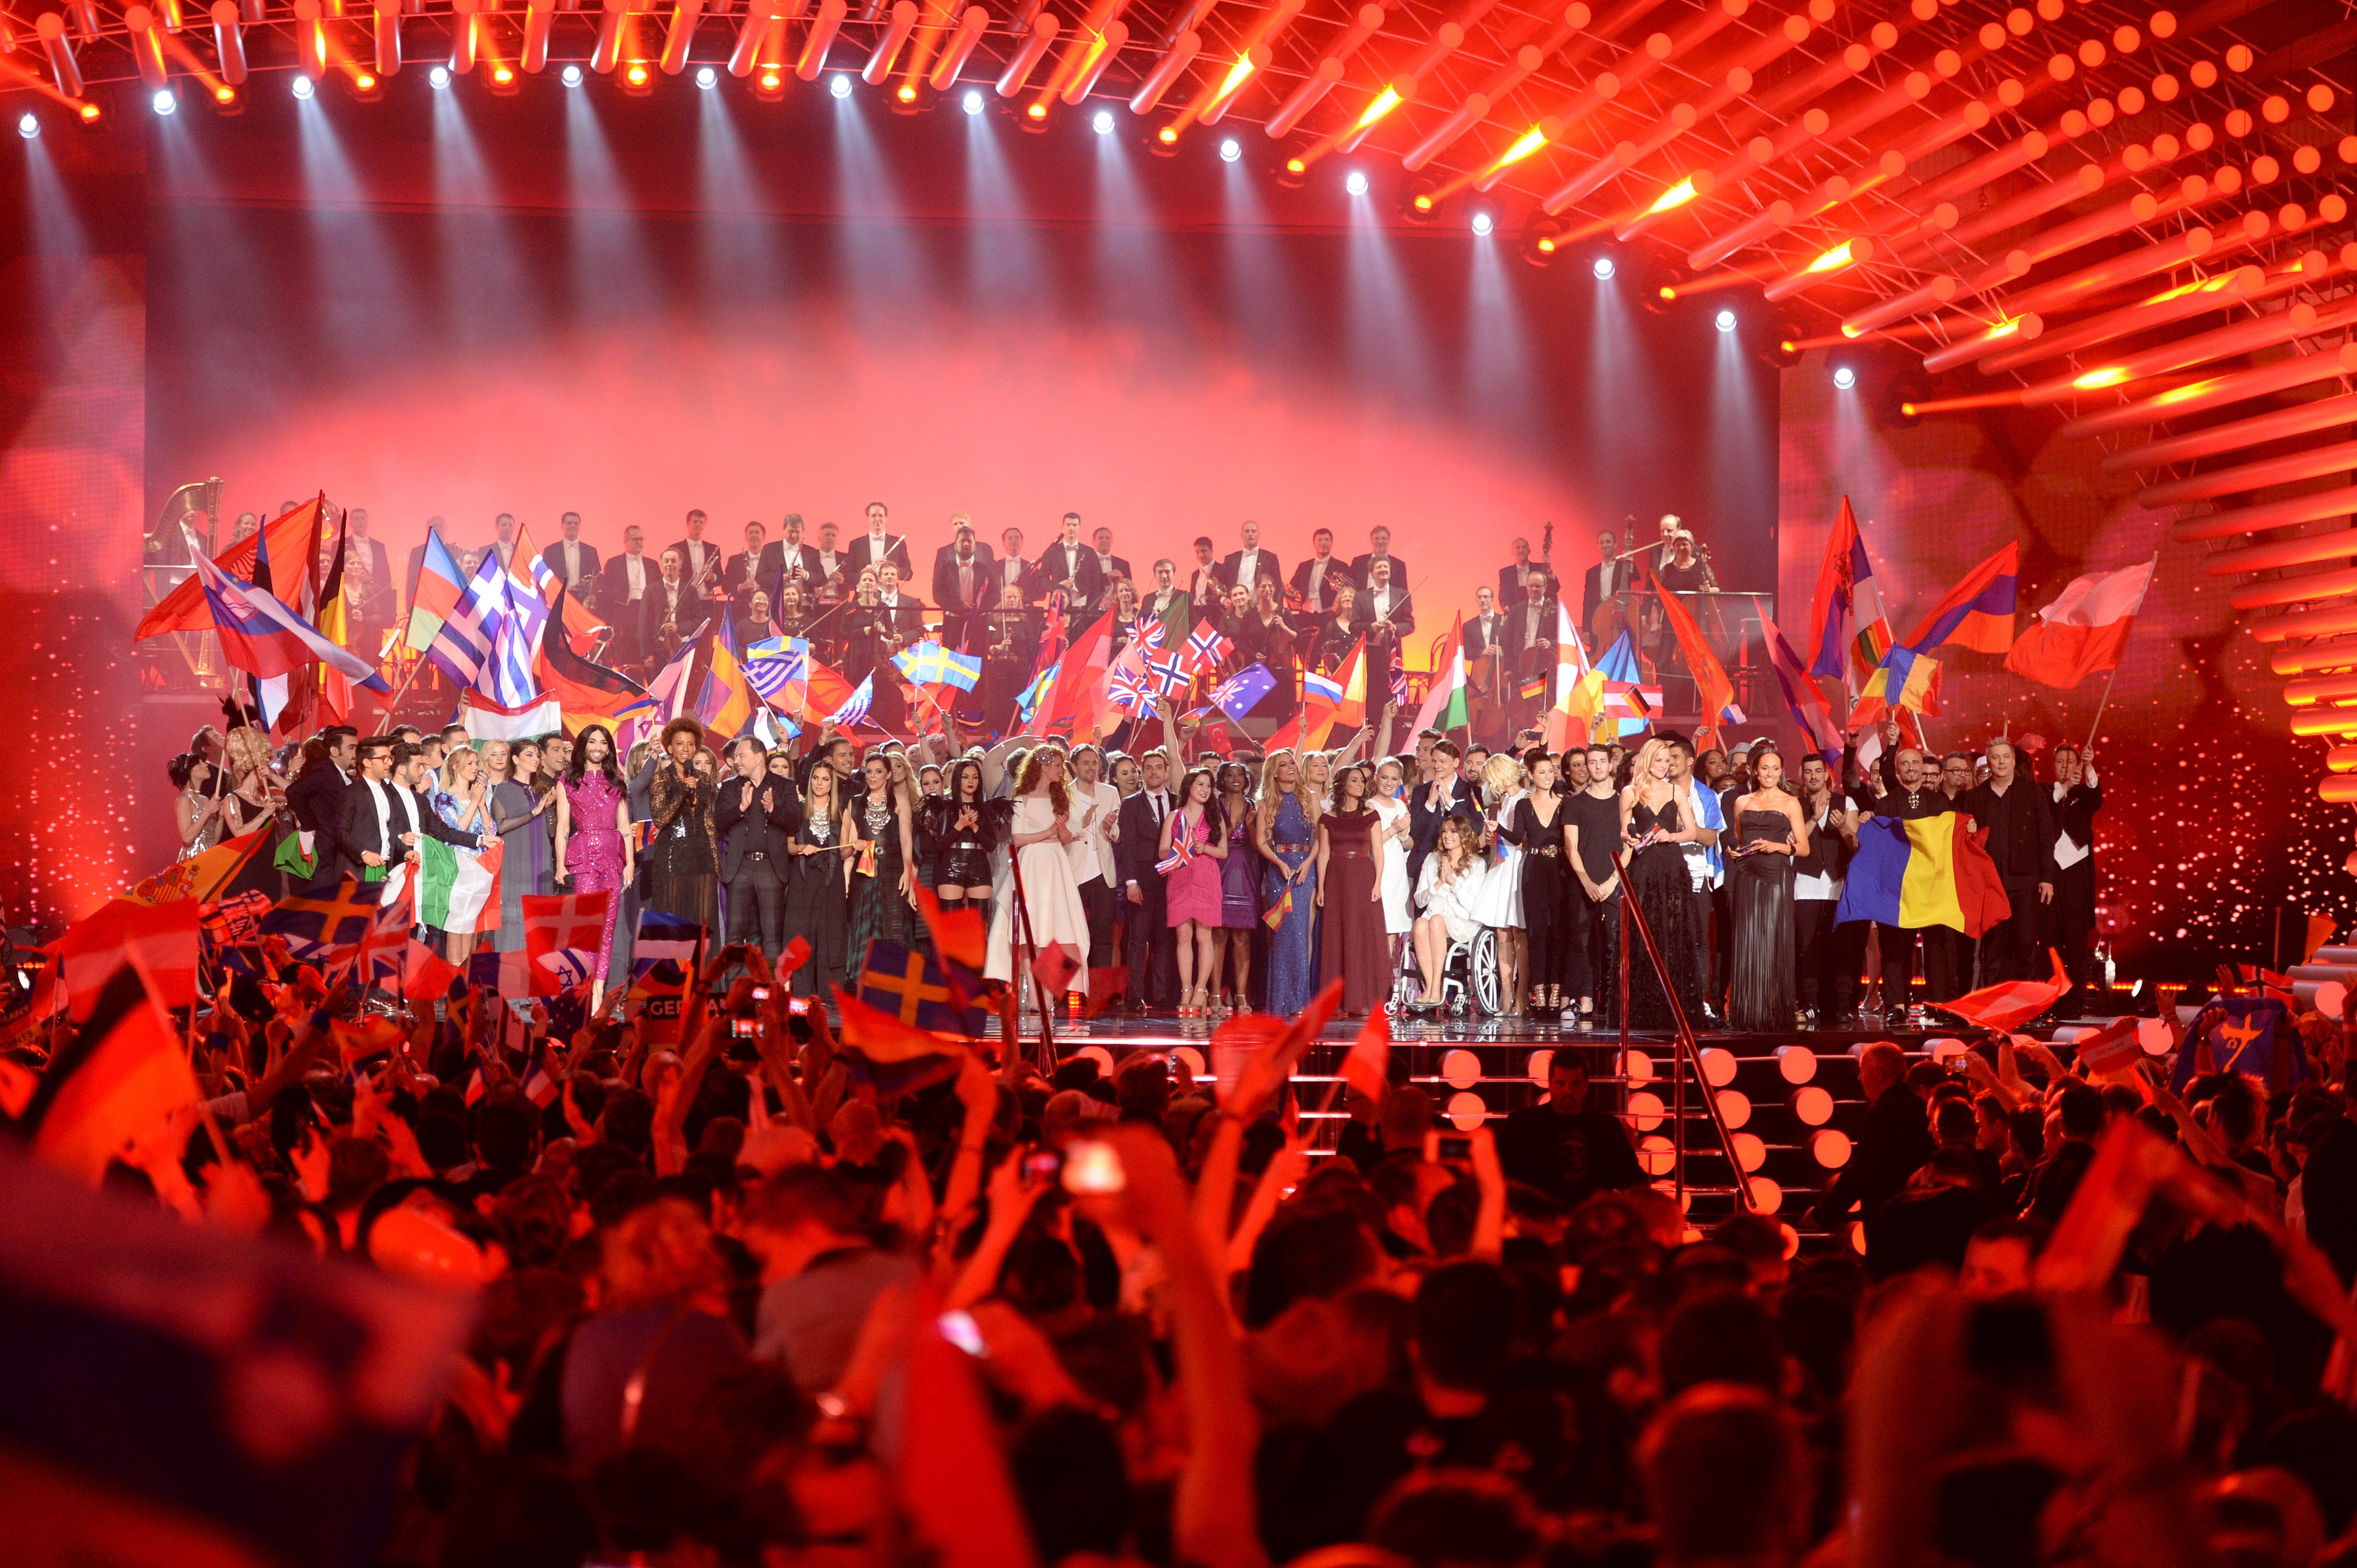 All participants stand on stage during the final of the Eurovision Song Contest 2015 on May 23, 2015 in Vienna, Austria. (Nigel Treblin—Getty Images)